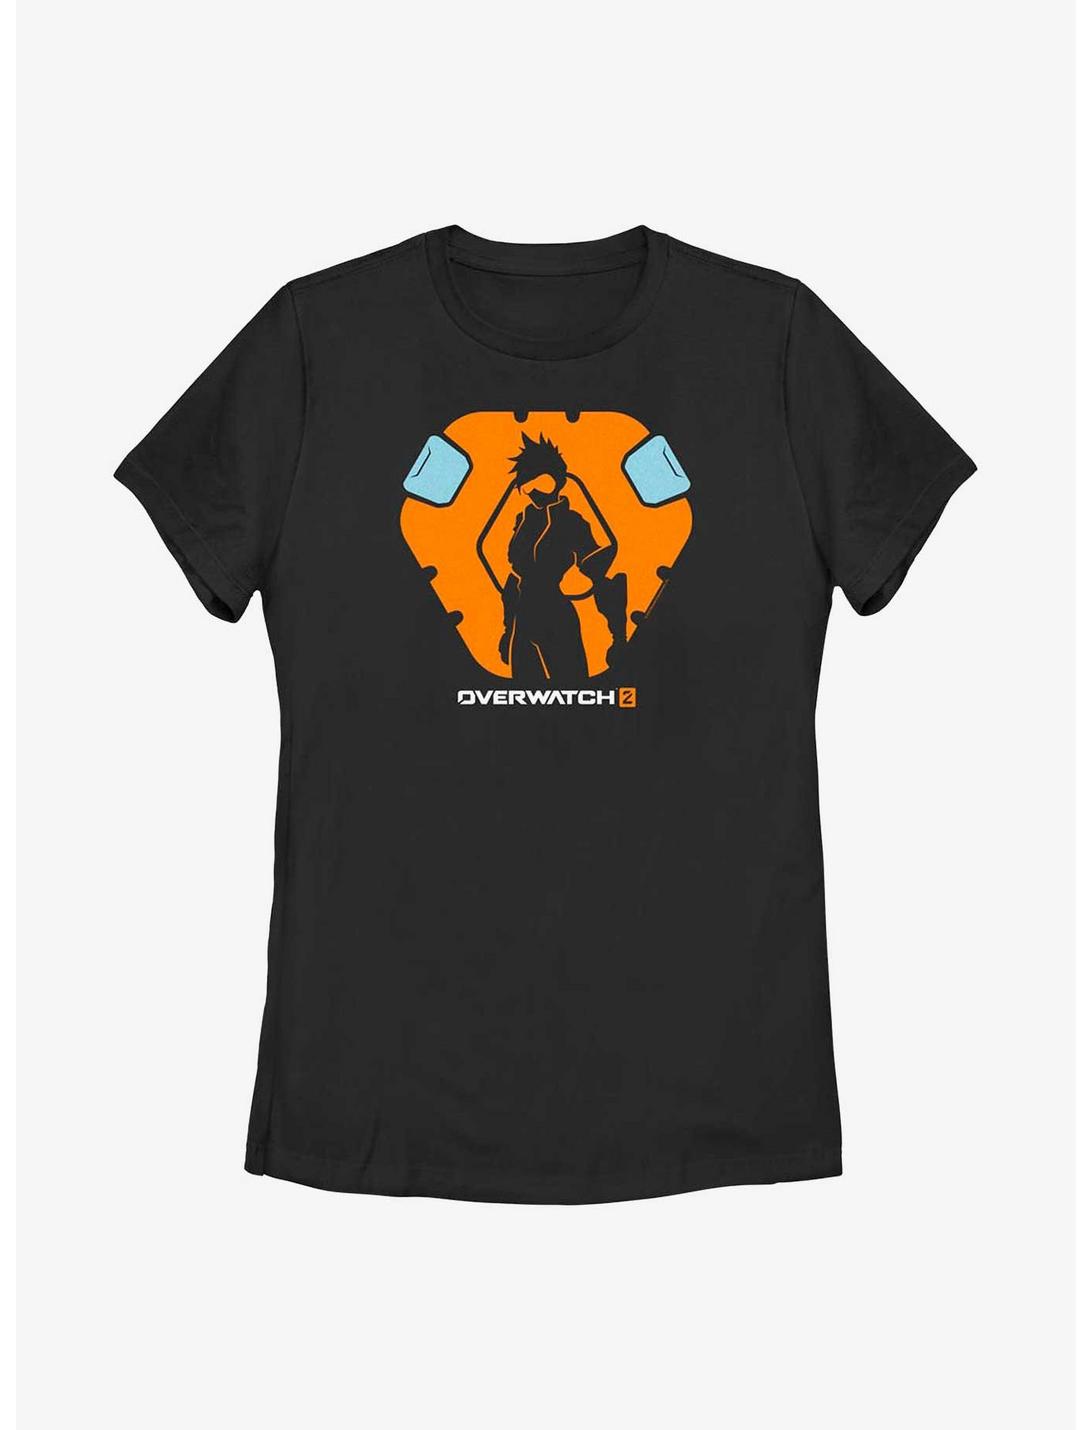 Overwatch 2 Trace Silhouette Womens T-Shirt, BLACK, hi-res